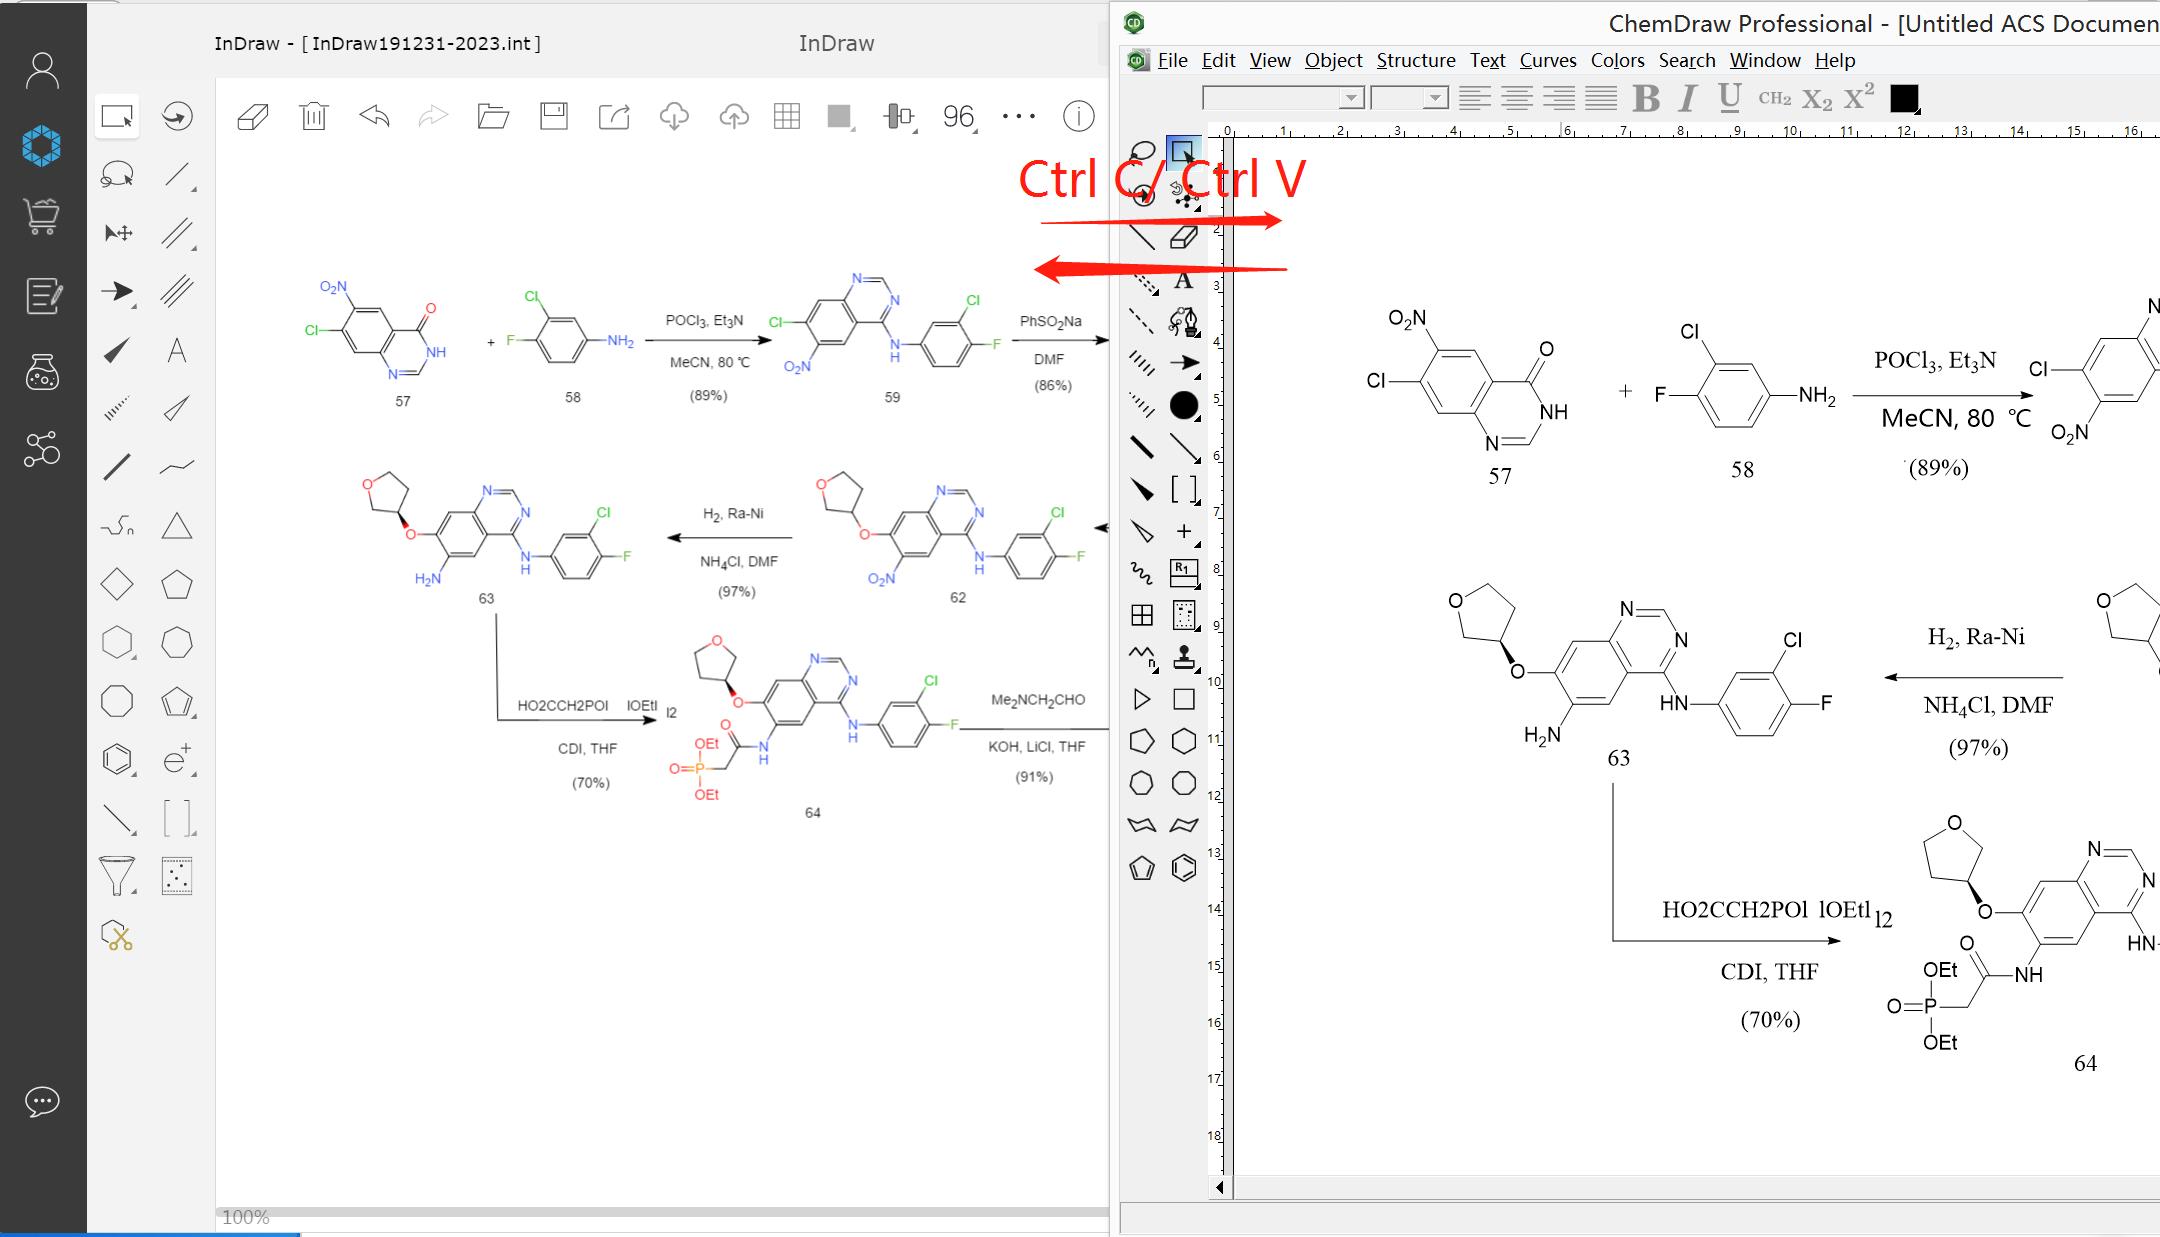  Mutual communication between InDraw and ChemDraw